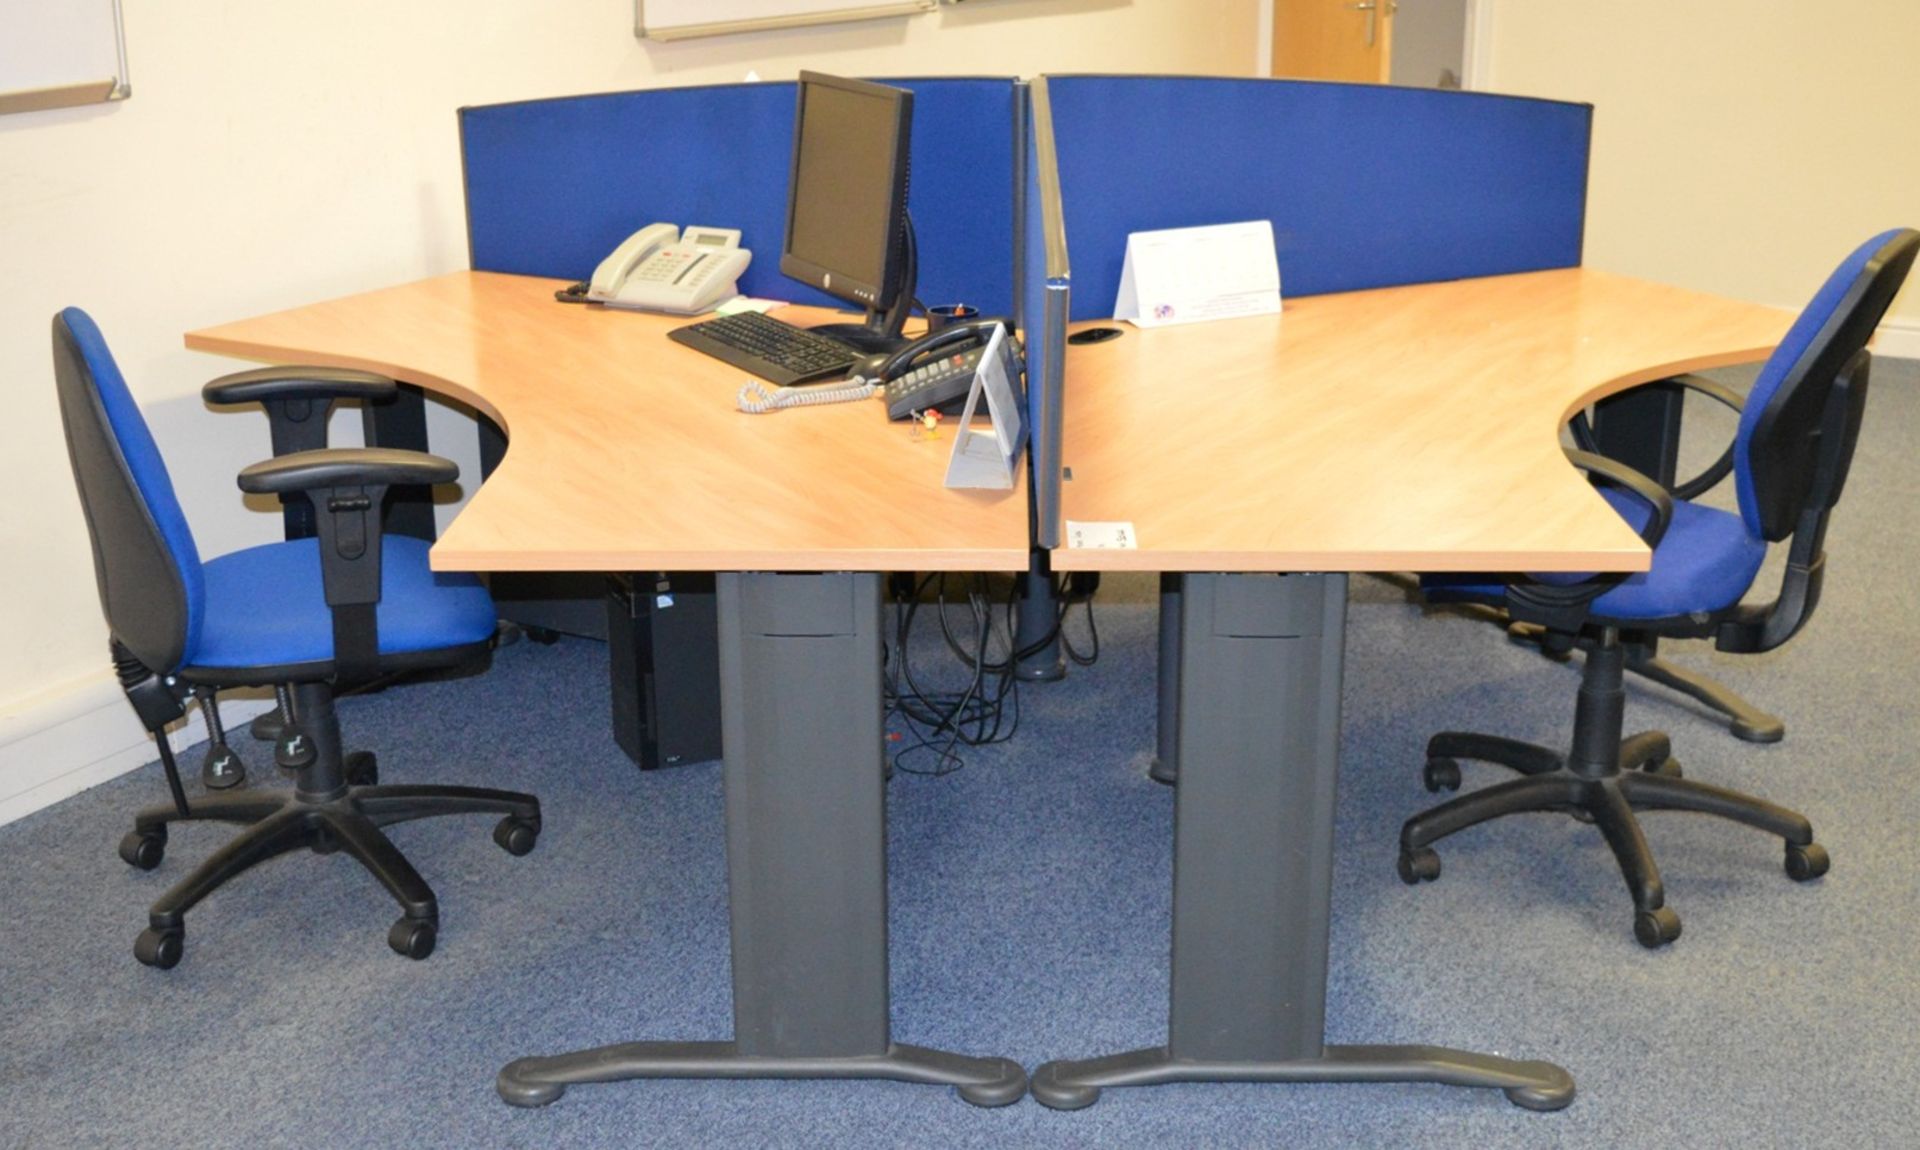 1 x Tripod Office Workstation Desk With Chairs - Suitable For 3 Users - Includes Three Premium